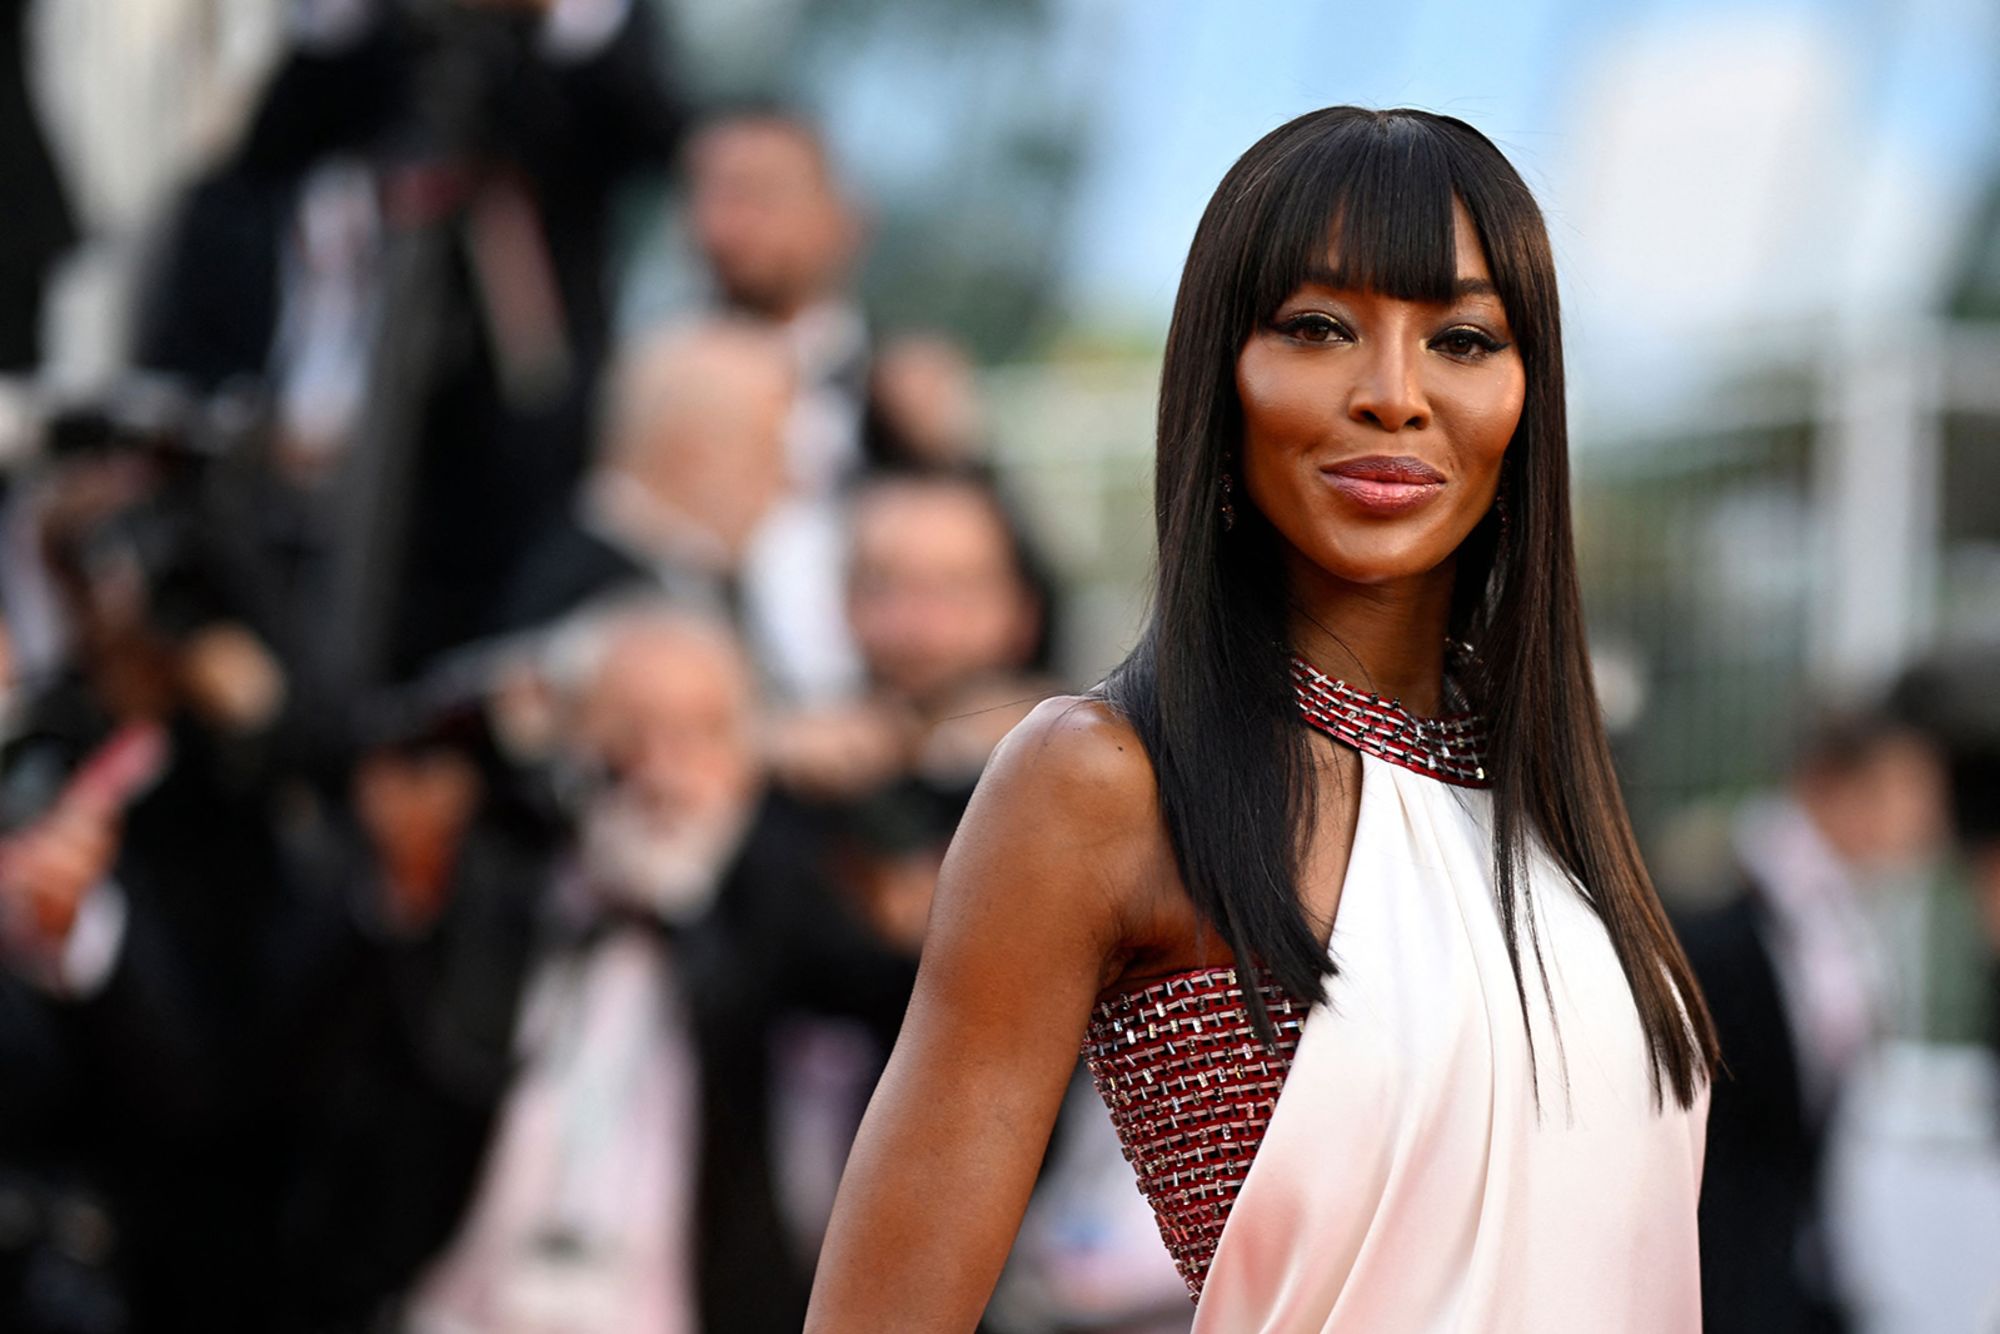 TOPSHOT - British model Naomi Campbell arrives for the screening of the film "Firebrand" during the 76th edition of the Cannes Film Festival in Cannes, southern France, on May 21, 2023. (Photo by Patricia DE MELO MOREIRA / AFP) (Photo by PATRICIA DE MELO MOREIRA/AFP via Getty Images)